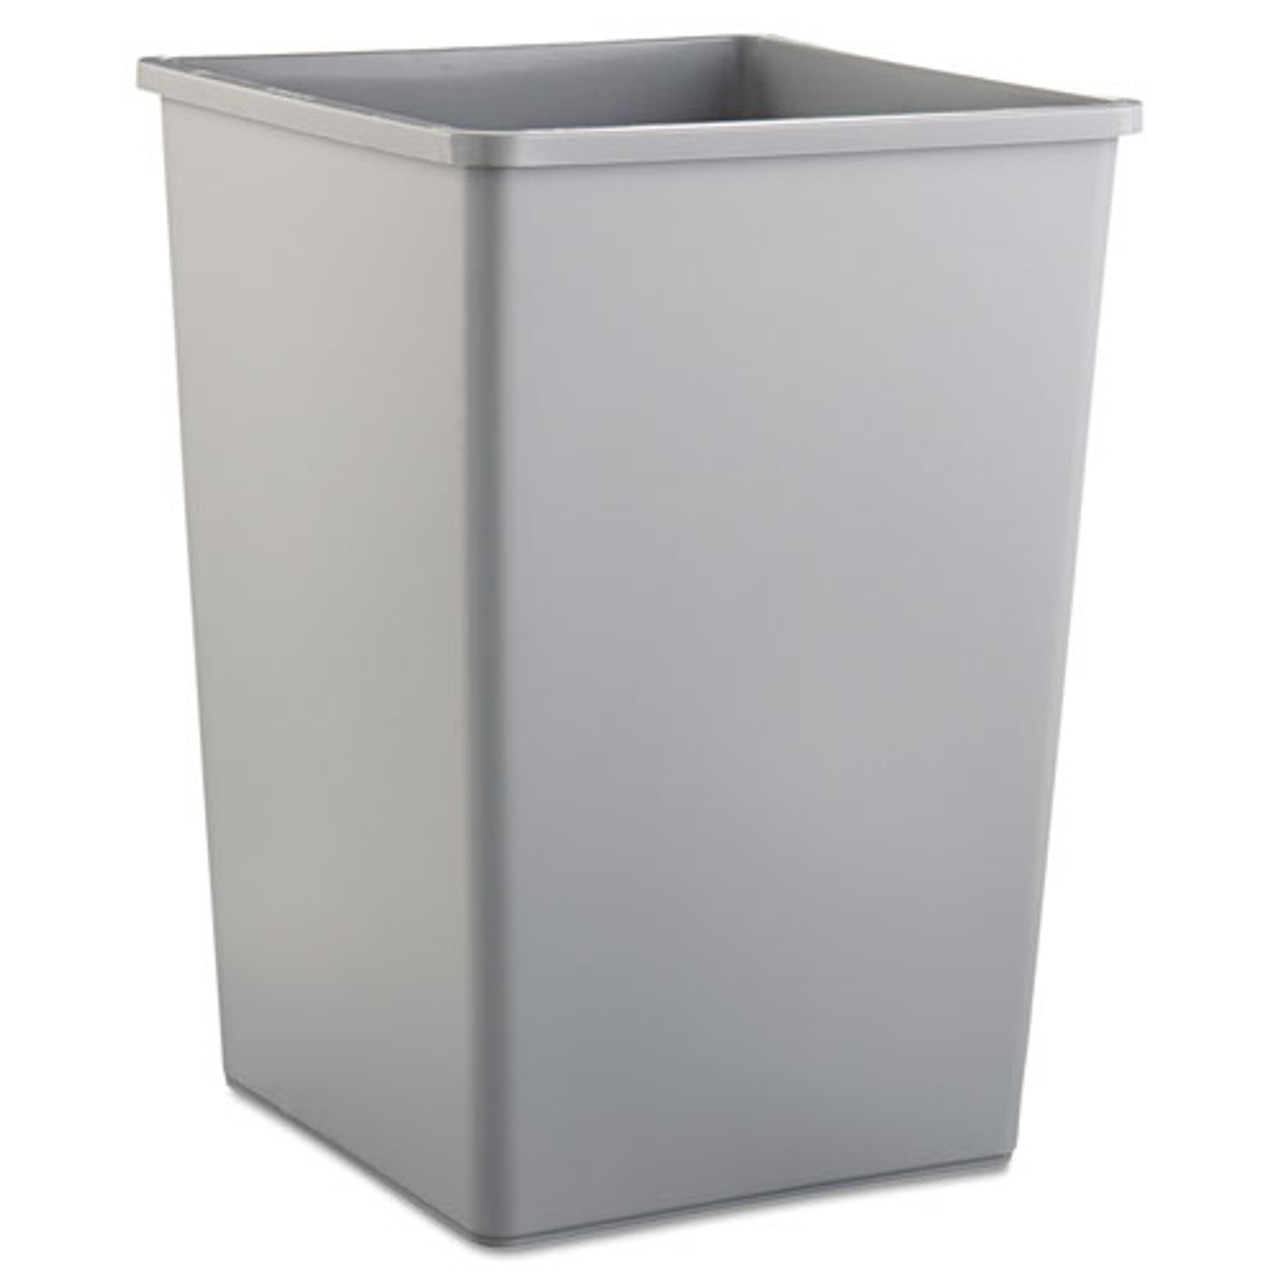 Rubbermaid Products, Rubbermaid Waste Containers